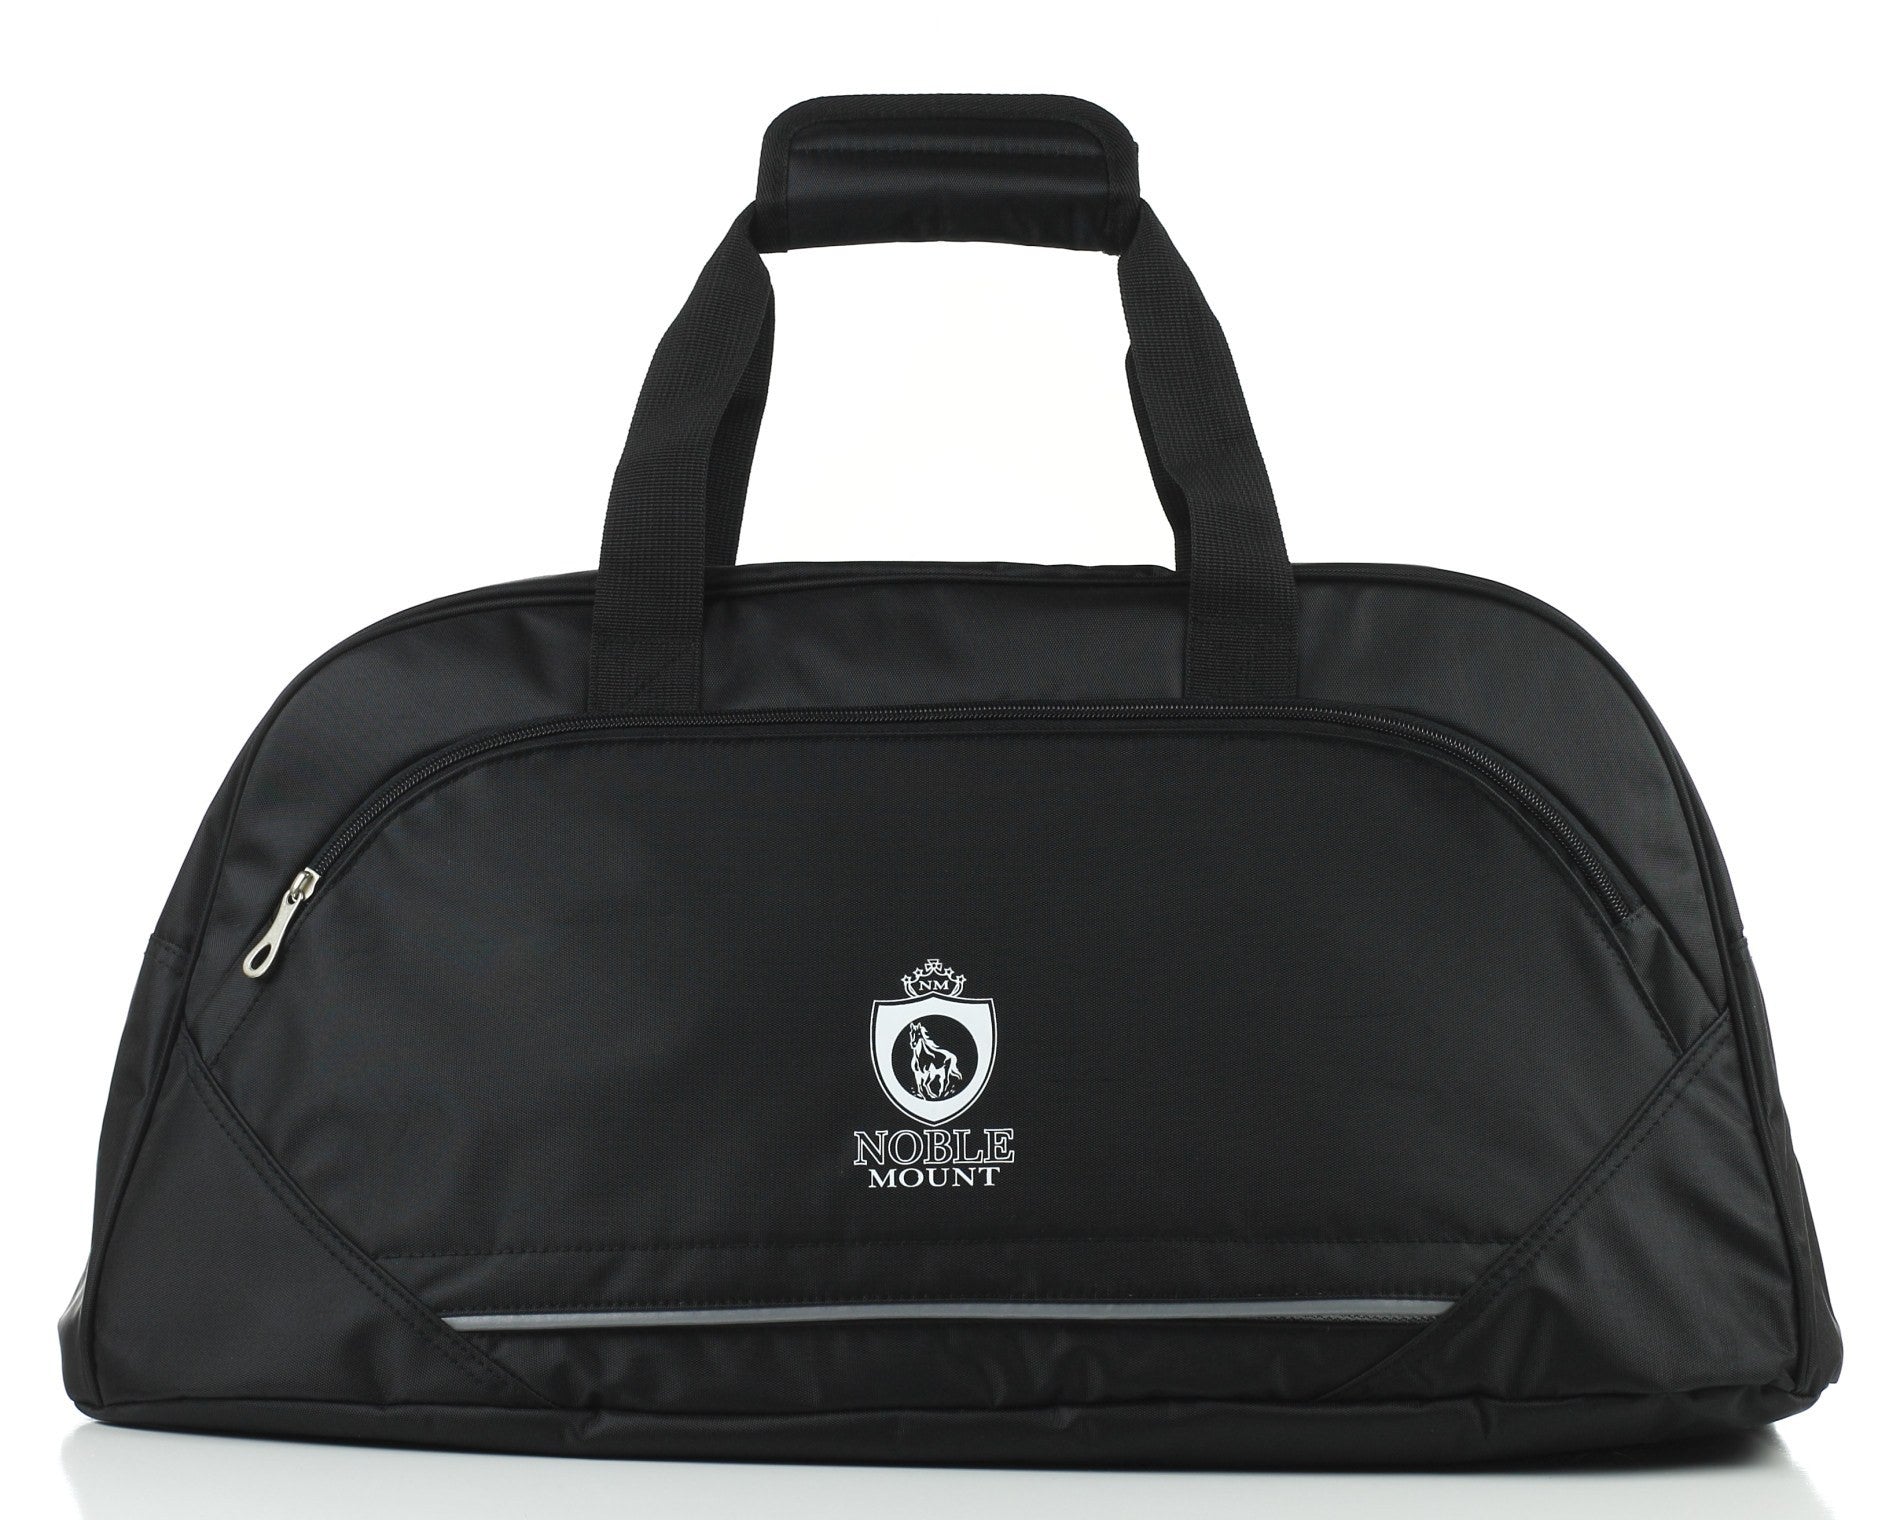 'One-for-All' Duffle Bag